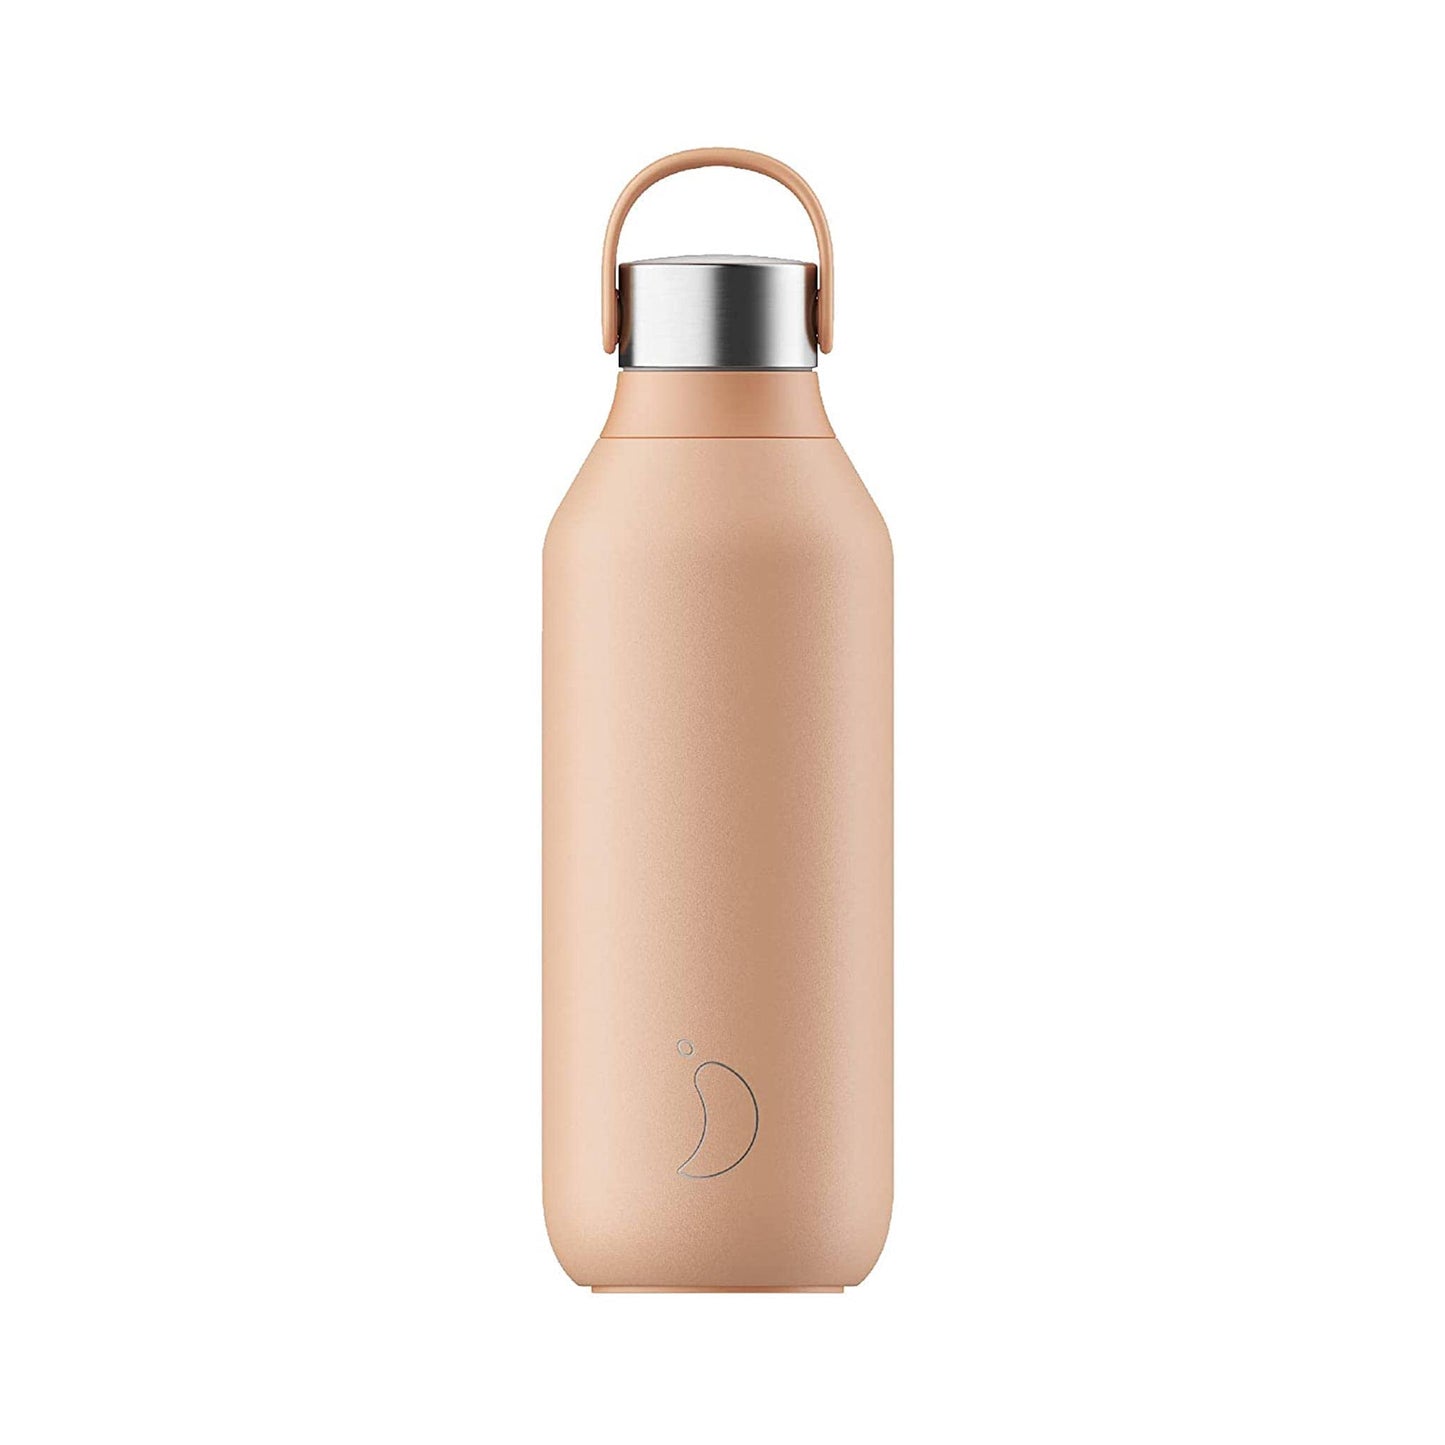 Chilly's Water Bottles Chilly’s 500ml Series 2 Stainless Steel Water Bottle - Peach Orange